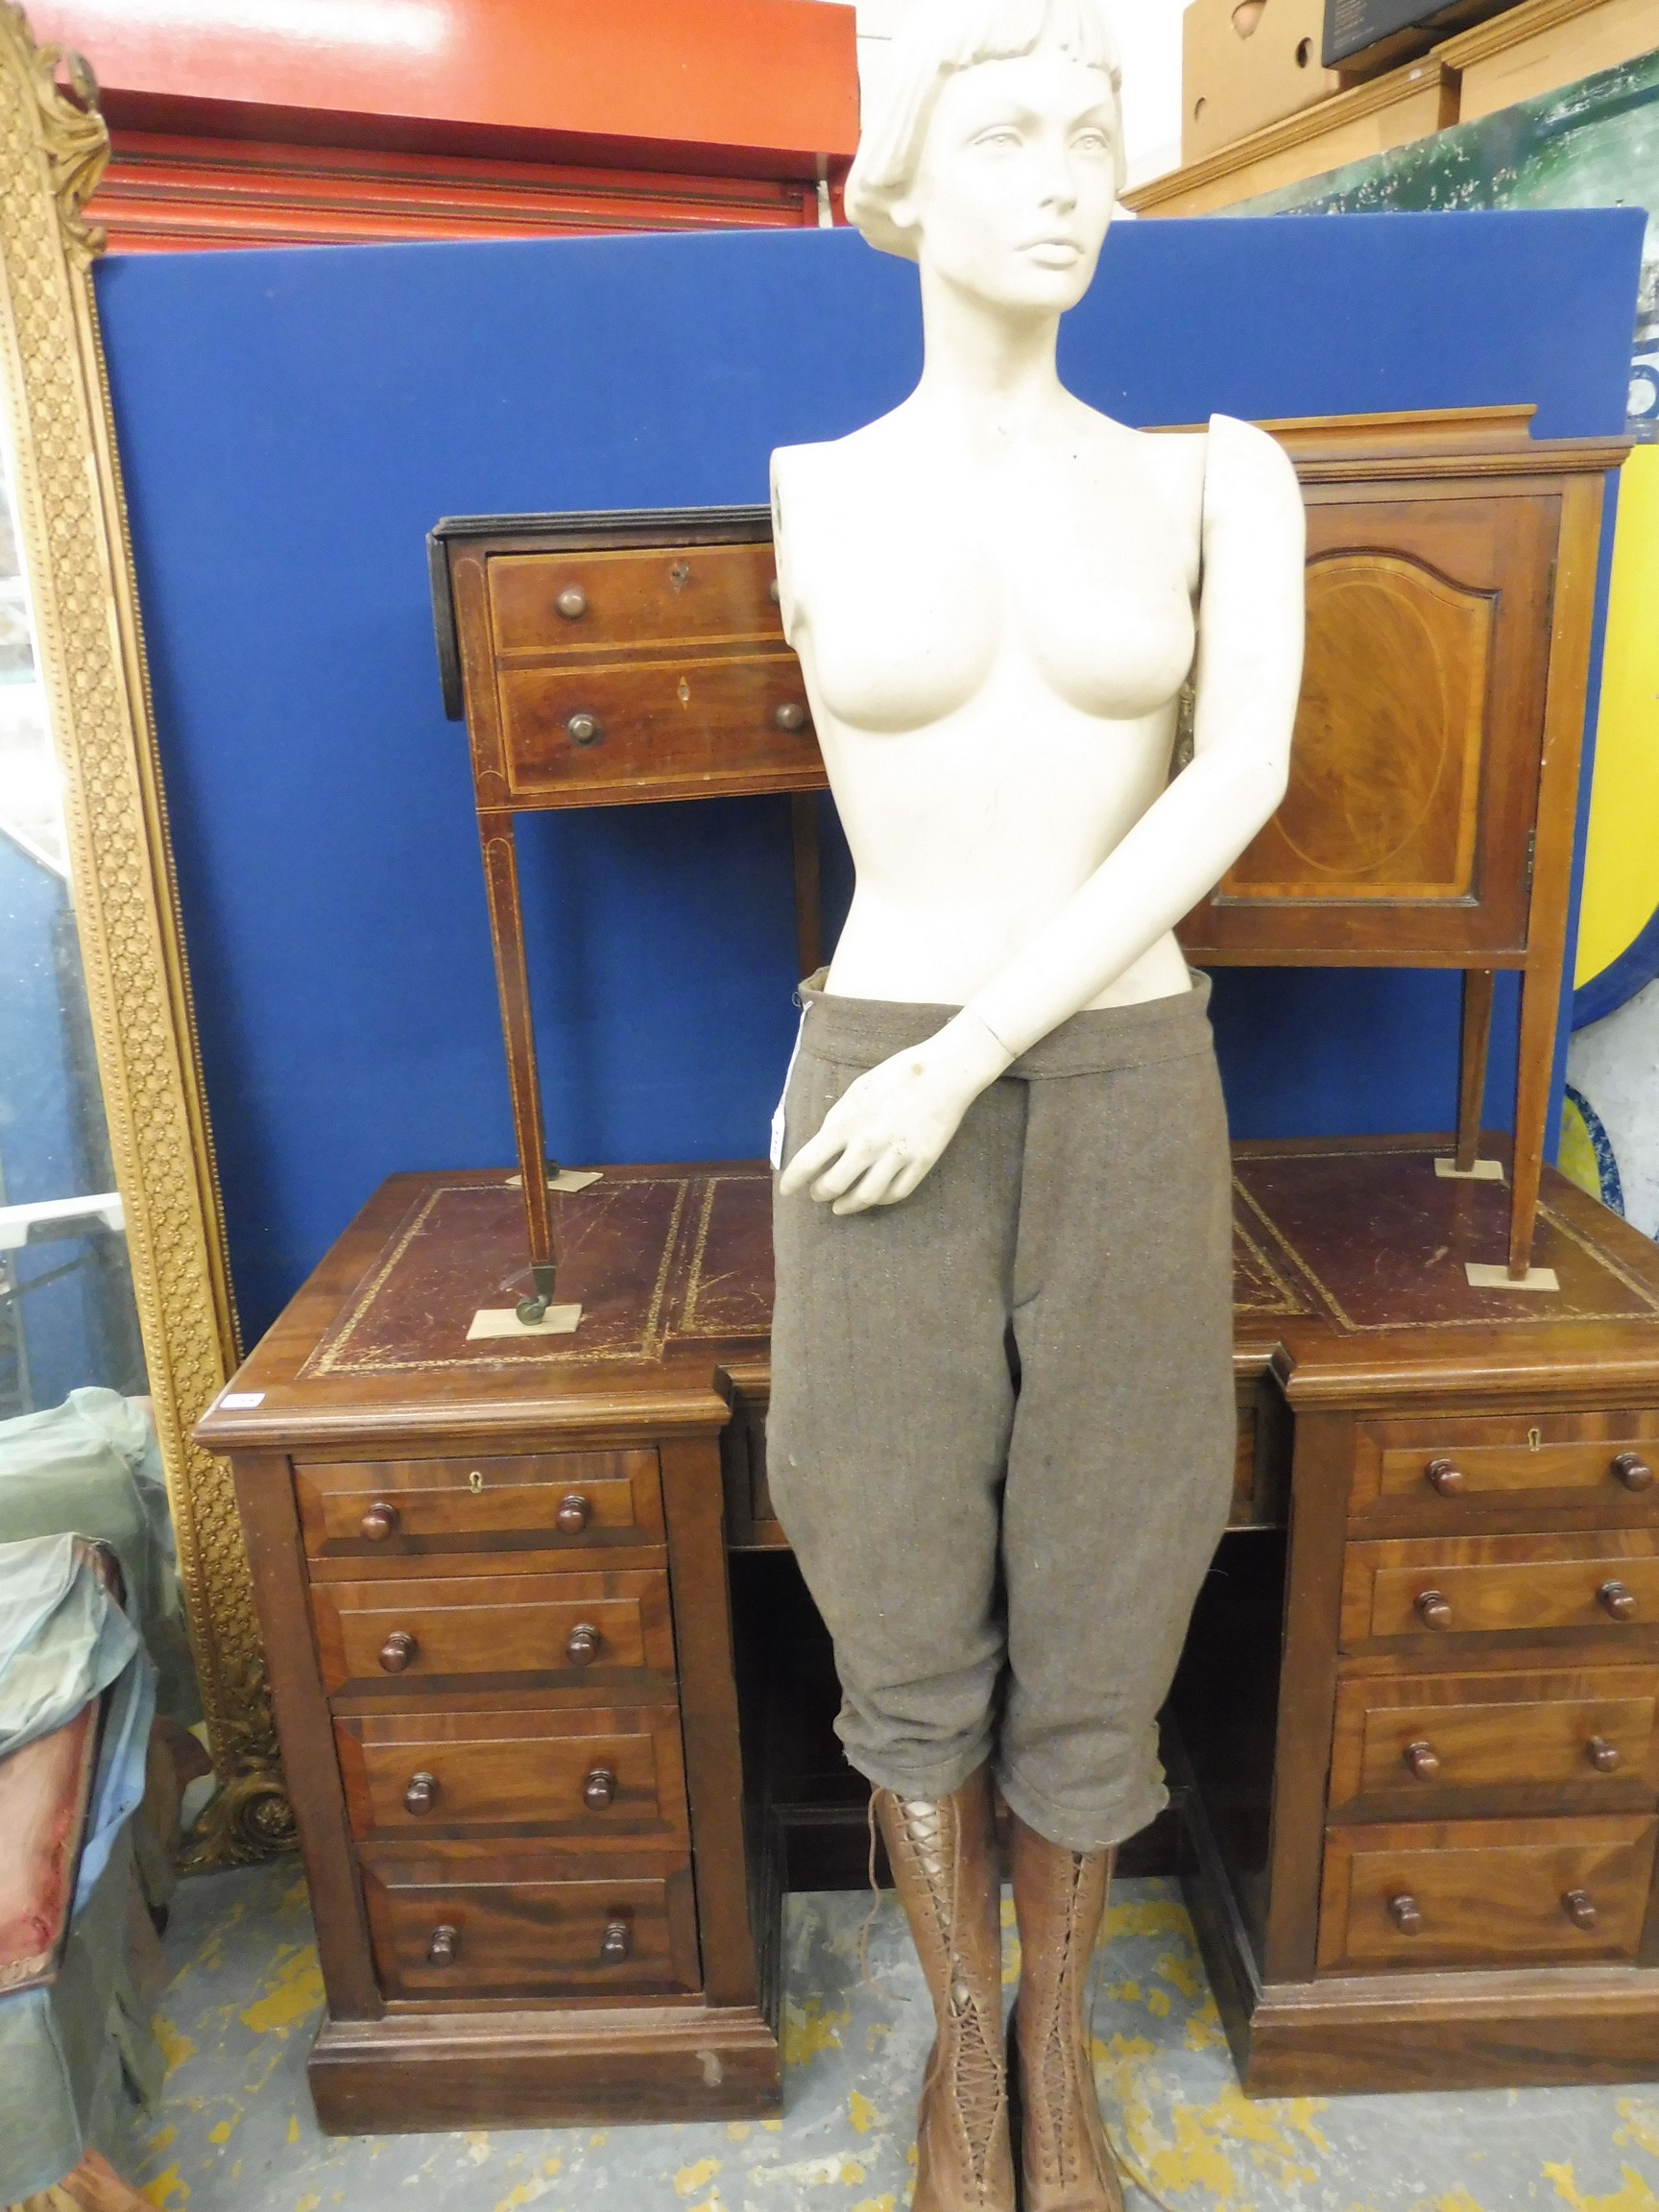 A one-armed female mannequin clothed from the waist down including tall brown leather lace up boots.